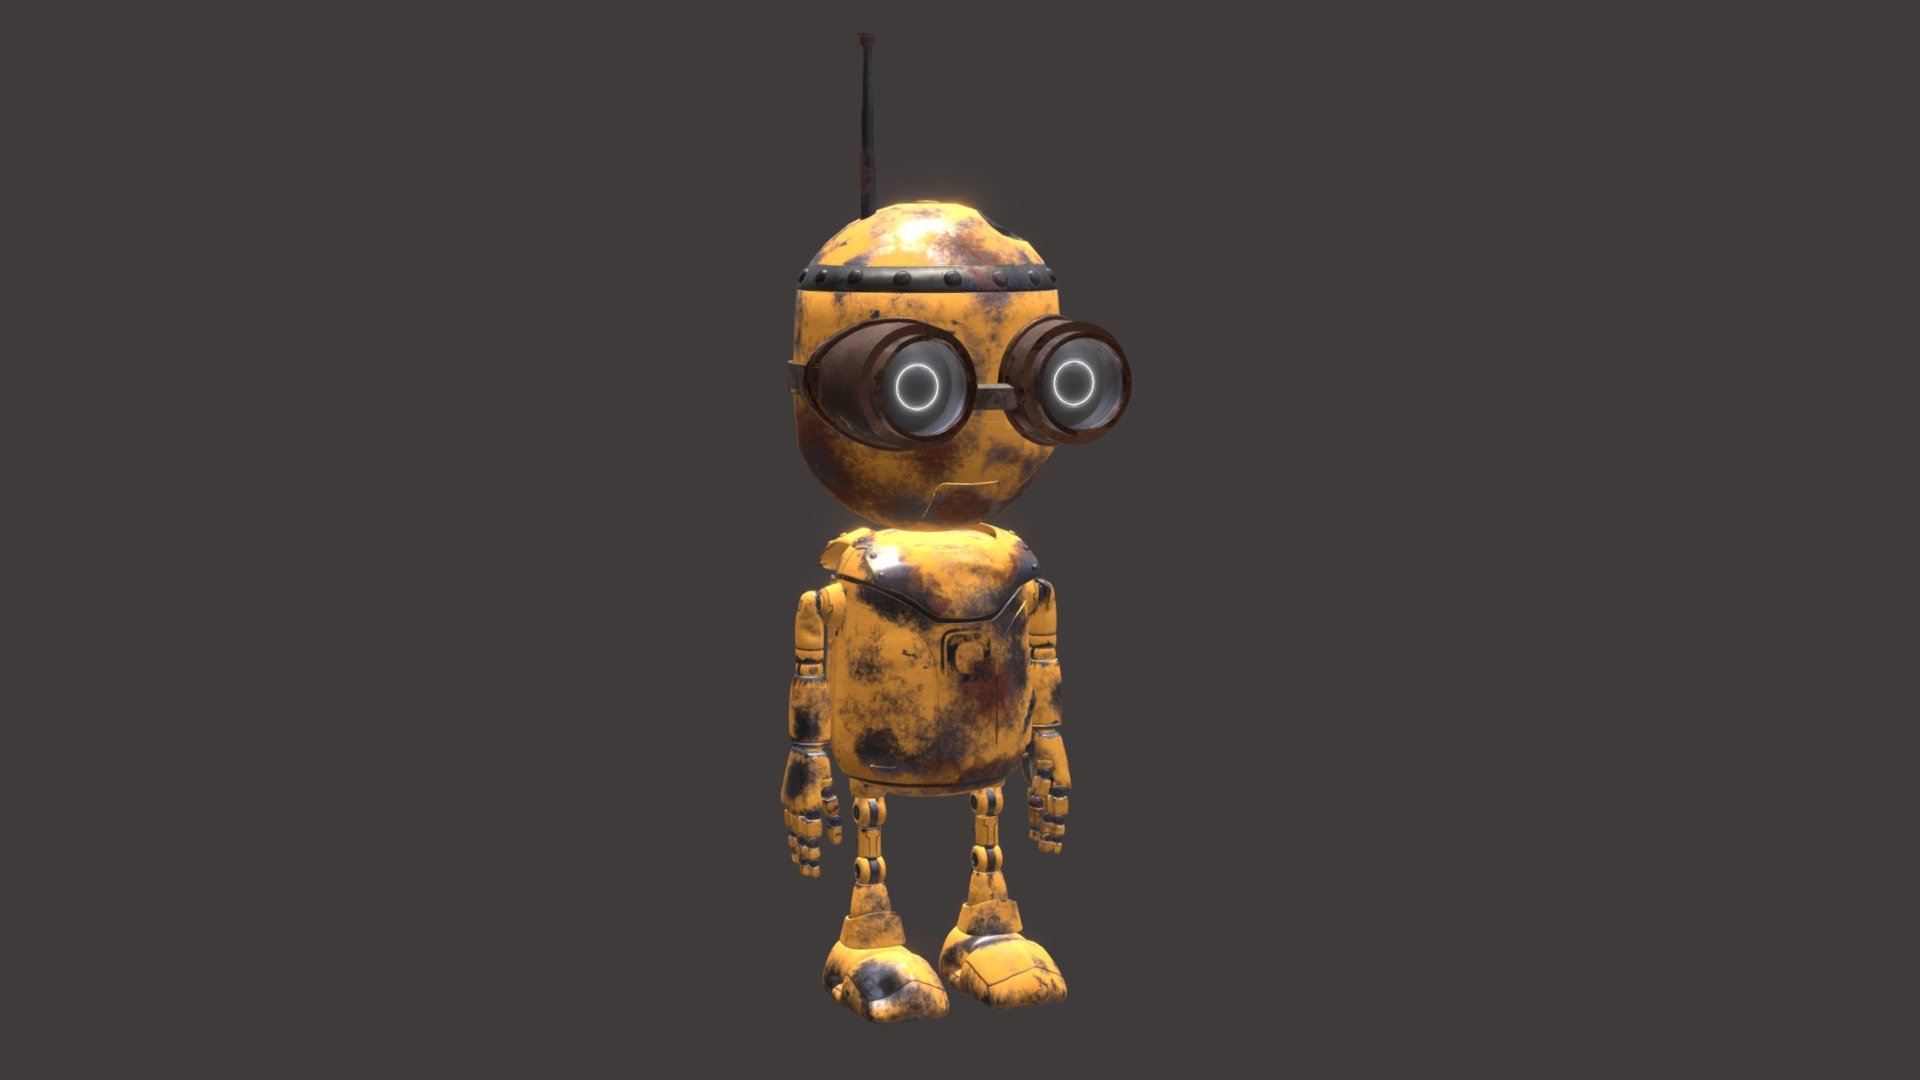 This is model of Baby Robot


Originally created with Blender v3.0.0
4k textures - base, emmisive, metallic, normal, rougness, transmis
Everything is logically named and structured
The model is centered at 0,0,0
The lighting scene included with model in BLEND file
Unit: cm
Dimensions: 96x32x95 cm (T-position and extended antenna)
Rigged with custom shape bones for better experience


&ndash;Features&ndash;
-   Model has Eyes with 9 shape keys (possible to combine), thanks to that you can achieve all expressions – Thickness, Size, Wide, Sad, Kind, Angry, Cry, Trusty, Hearth
-   Model has Telescopic Antenna controlled by 1 shape key


&ndash;Geometry&ndash;
-   Polygon count: 84 303
-   Vertex count: 84 721
-   Quad/Tris topology


&ndash;Files&ndash;
-   BLEND
-   OBJ
-   FBX
-   DAE
-   STL
-   PLY - Rigged Baby Robot - Buy Royalty Free 3D model by QubiCone 3d model